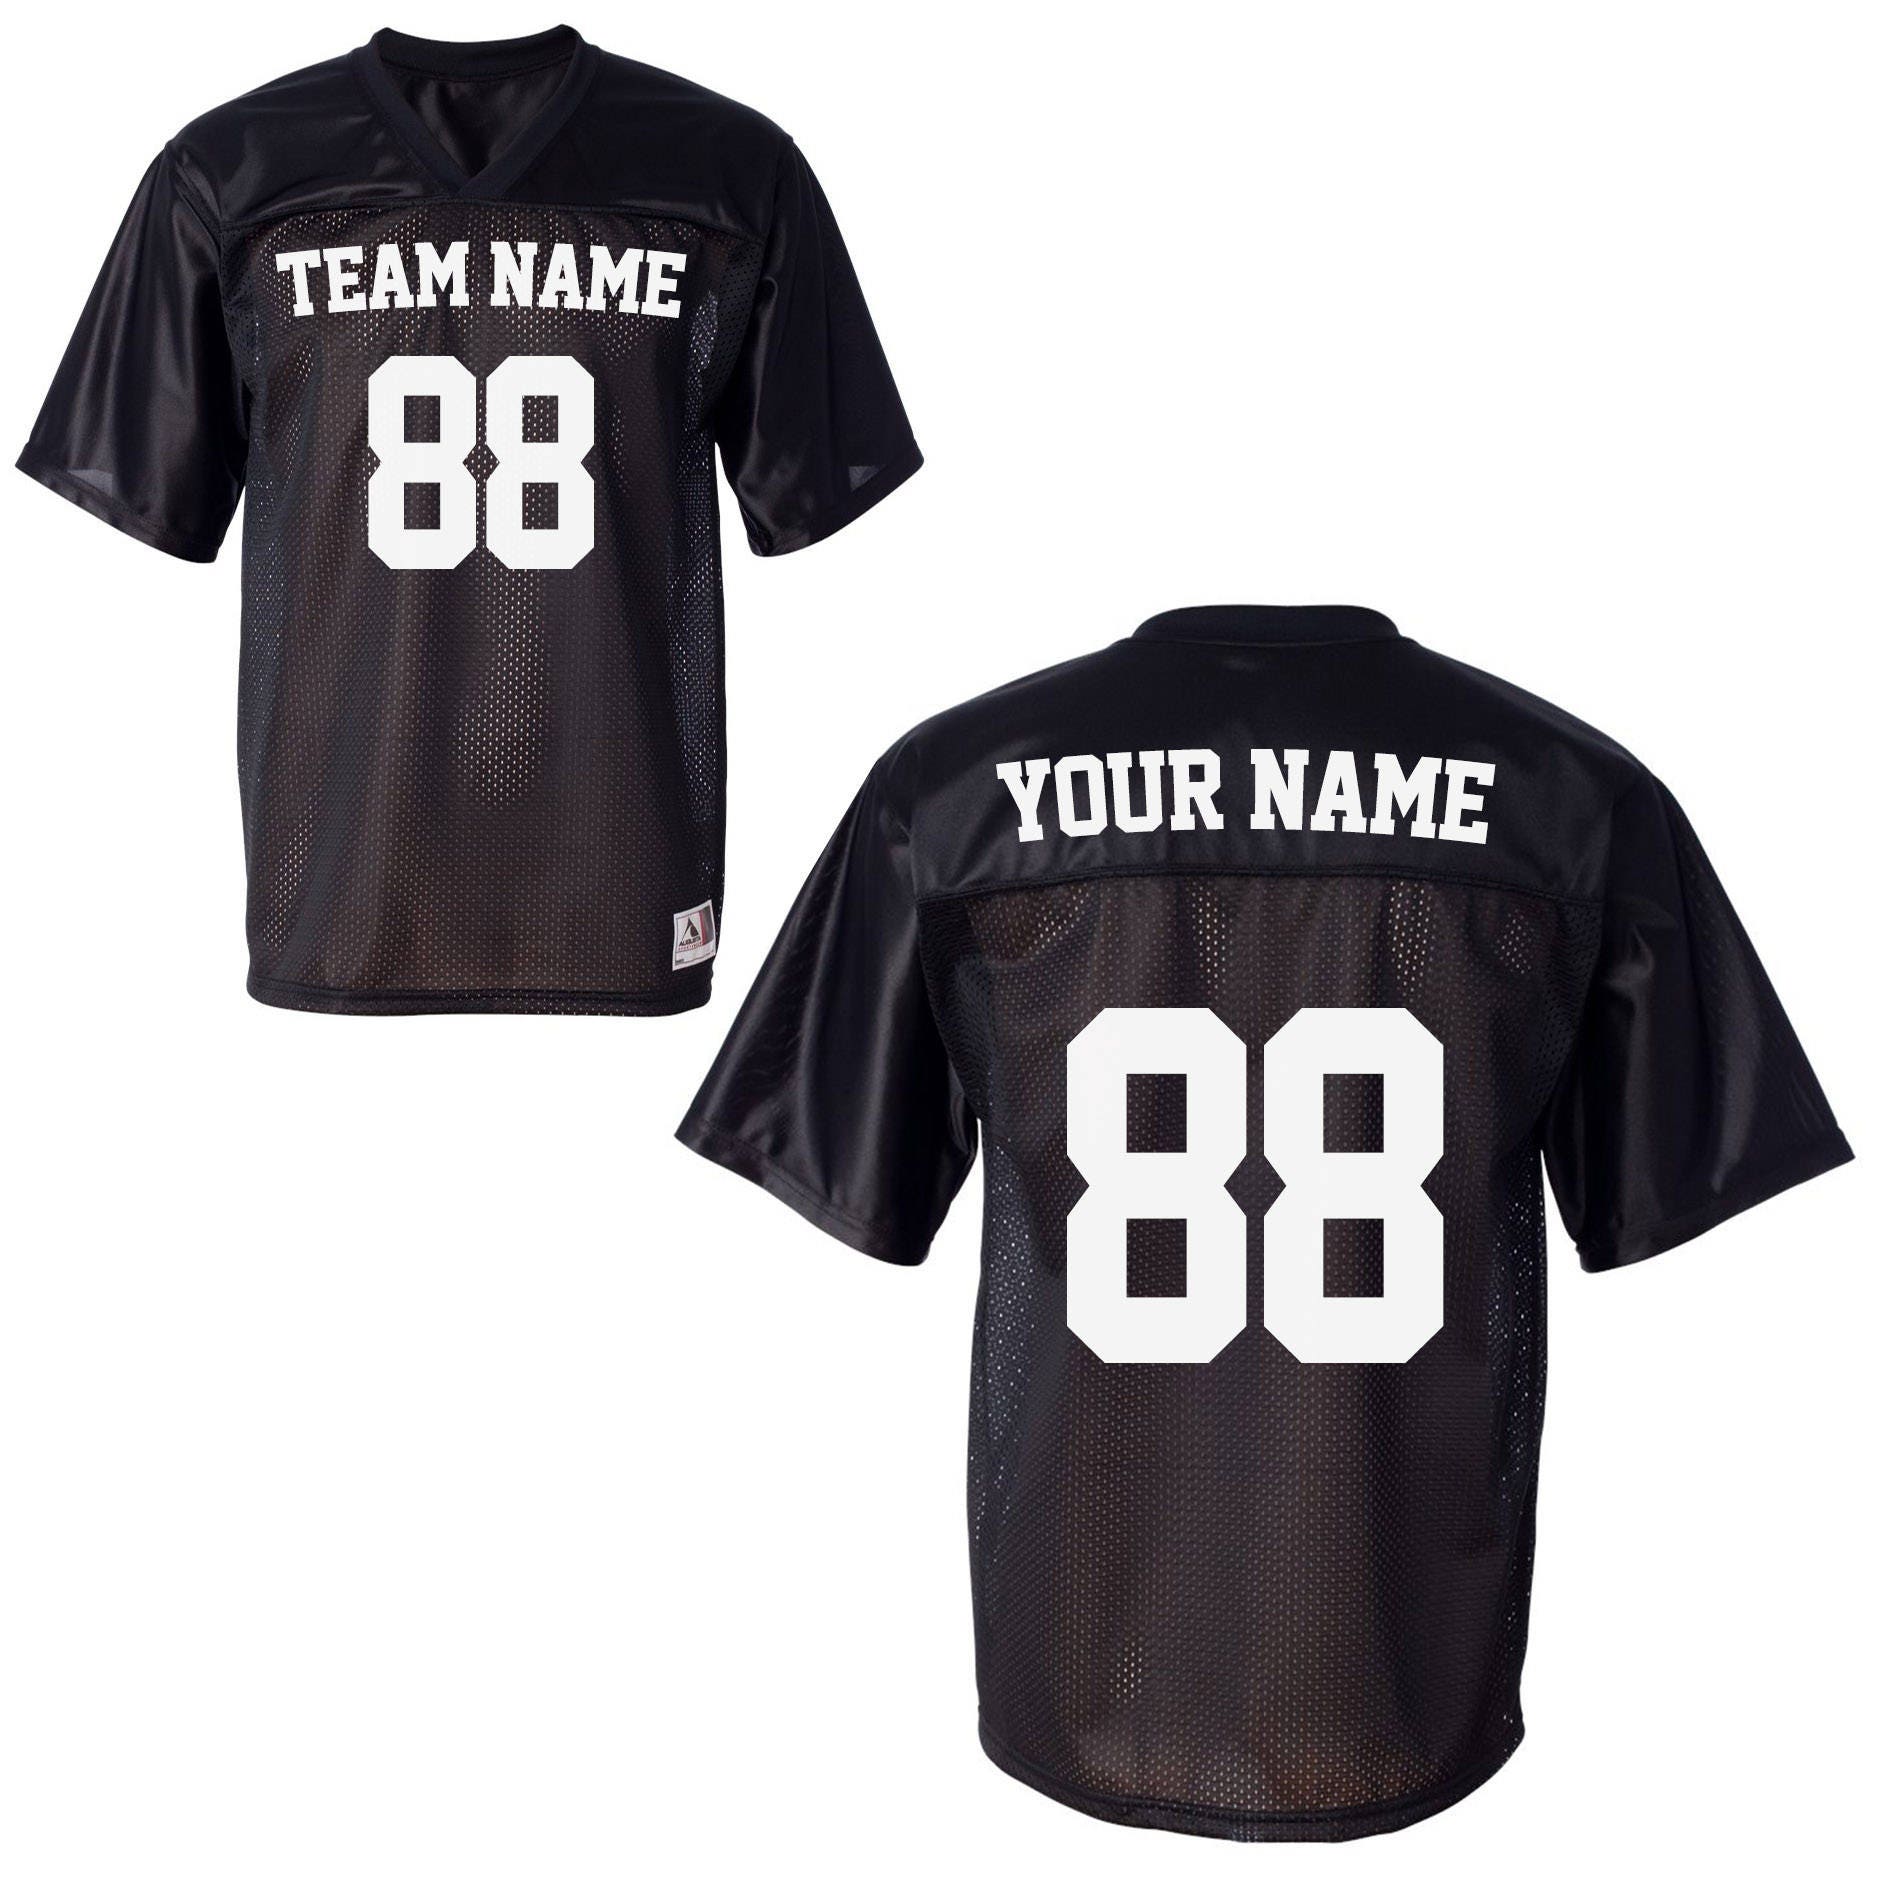 Customized Jerseys Make Your Own Jersey T Shirts